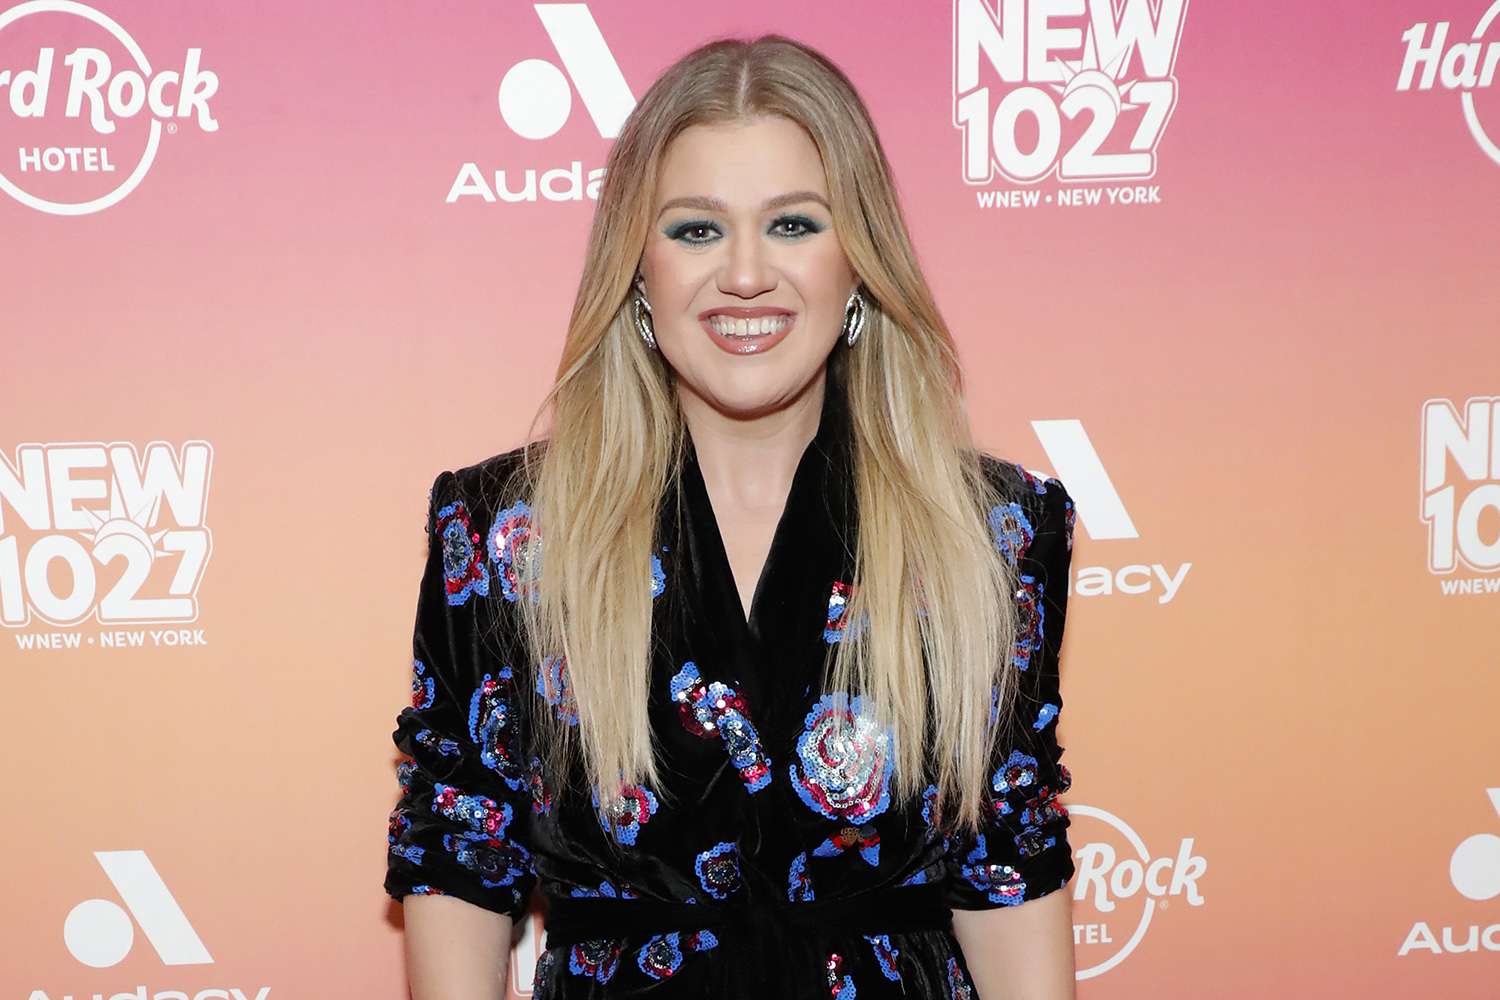 Kelly Clarkson Sets Strict Social Media Rules For Her Kids While They Live With Her